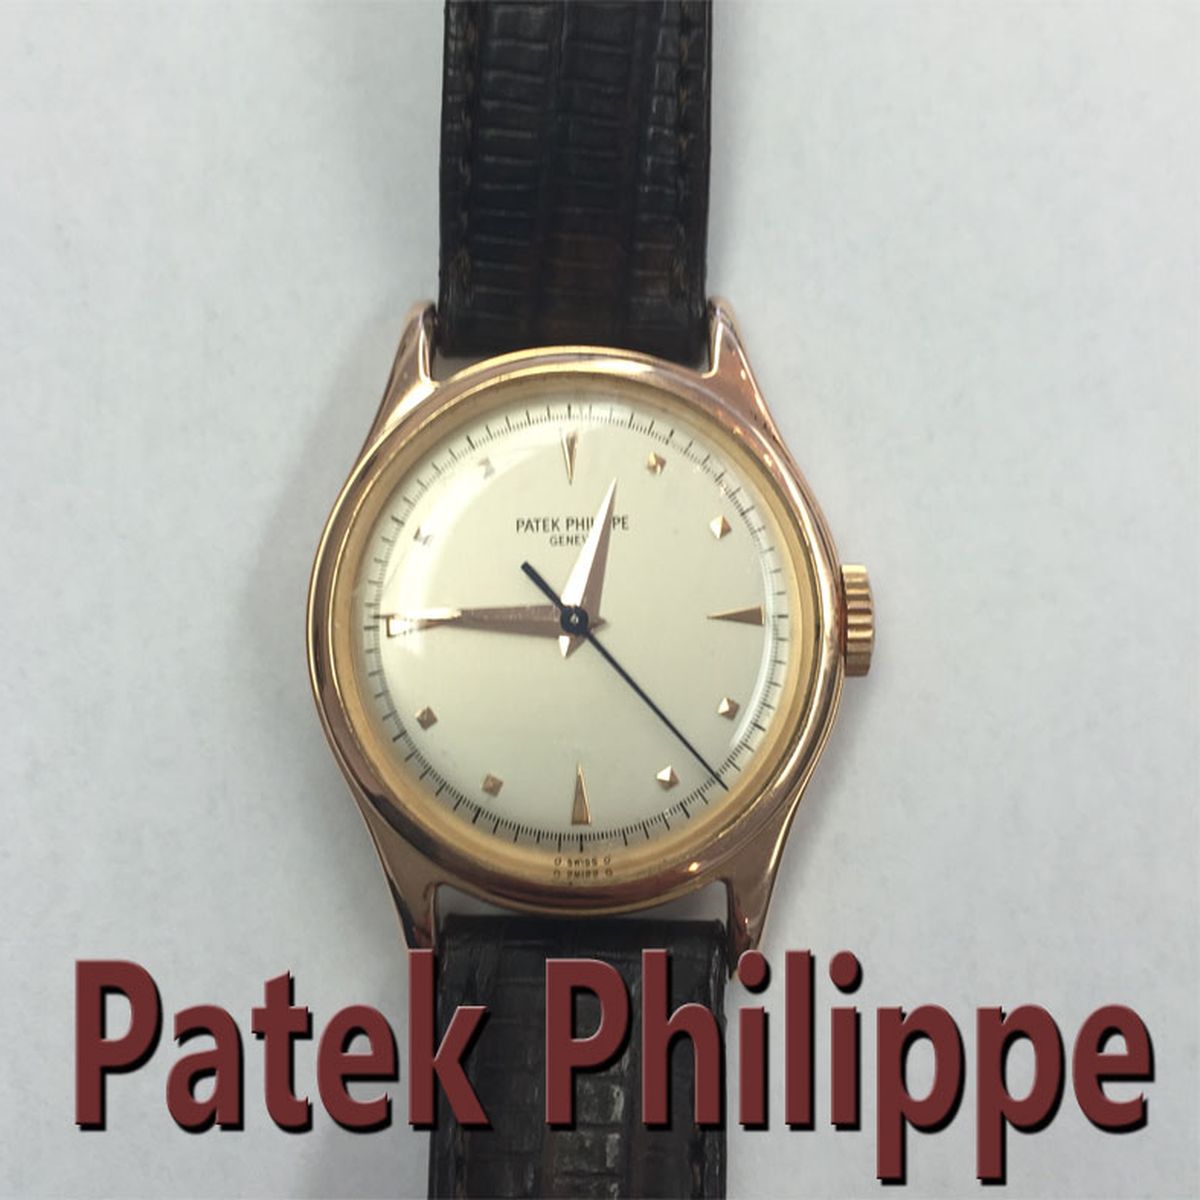 What The Patek Philippe Company is Famous For